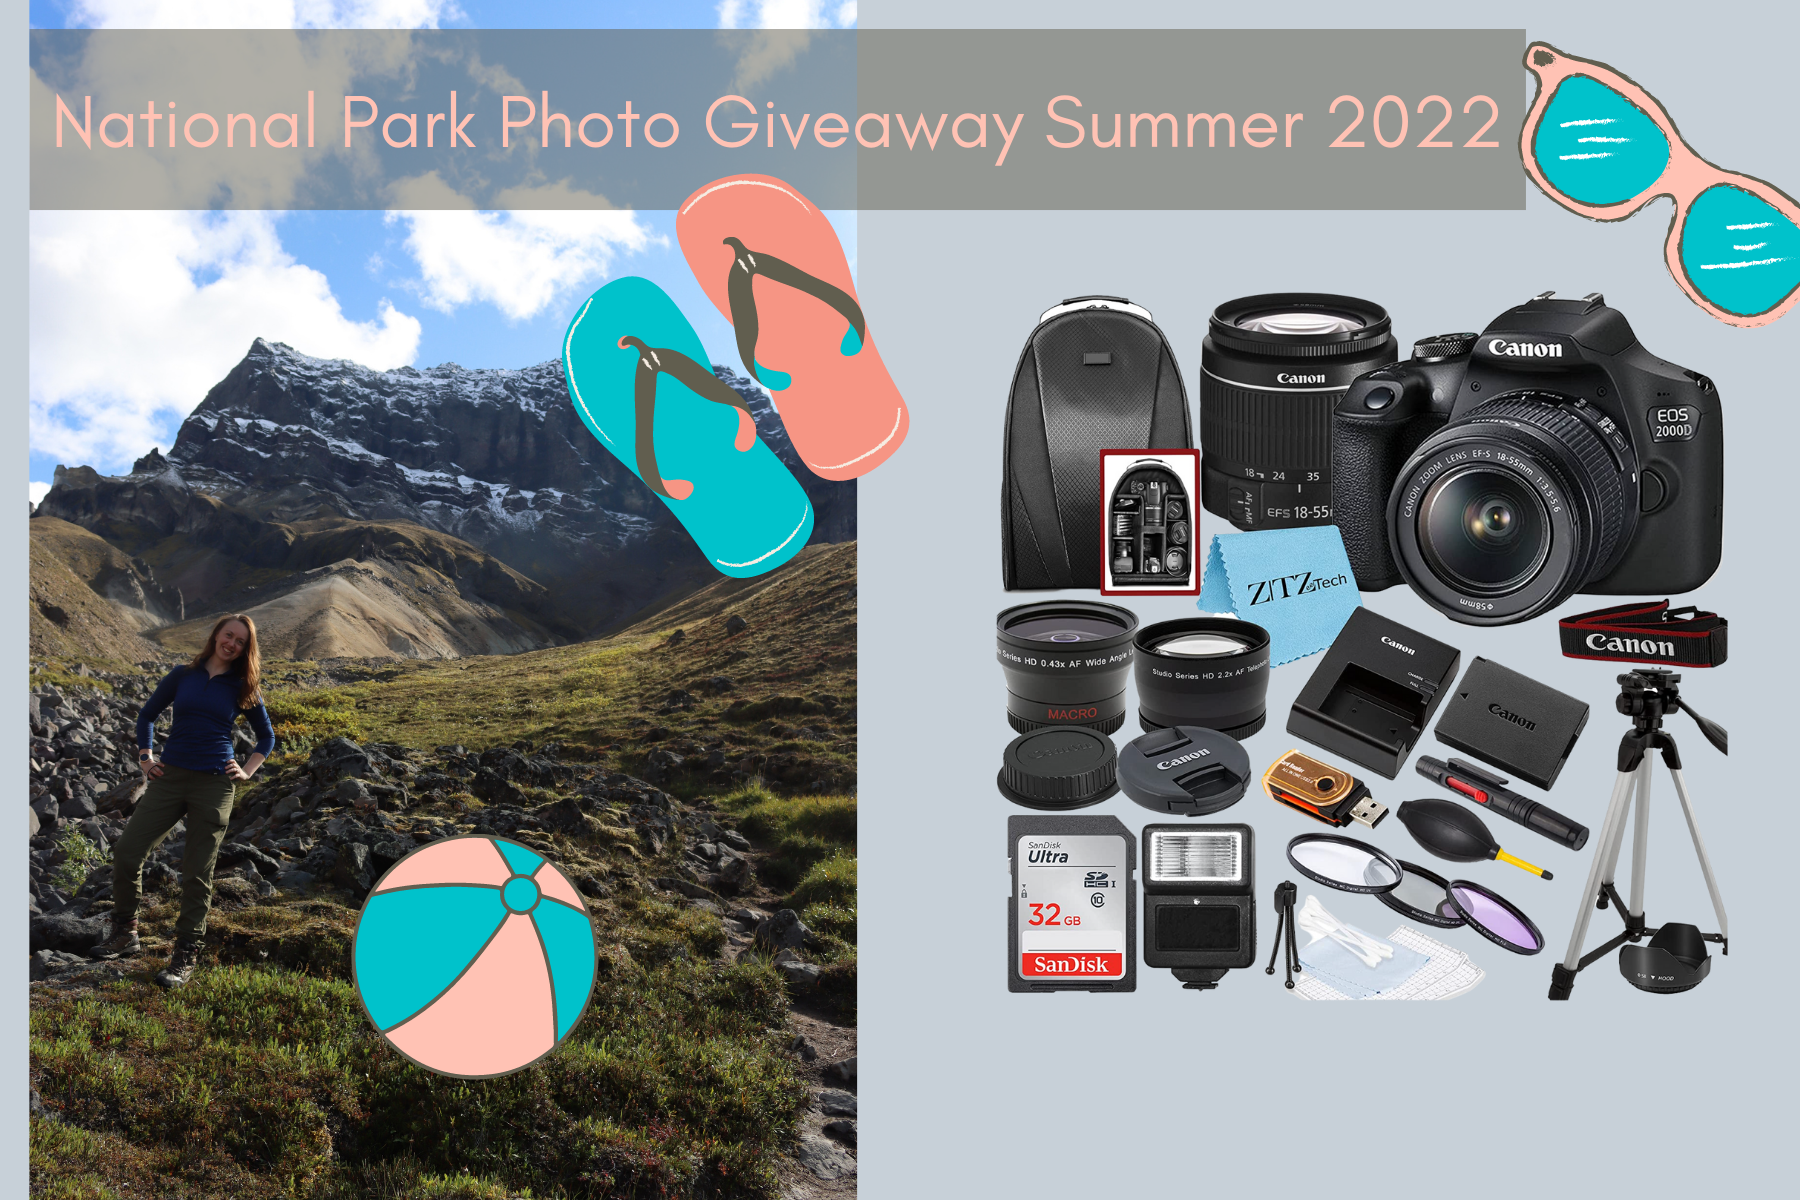 Canon Rebel T7 DSLR Camera and Accessory Pack Giveaway